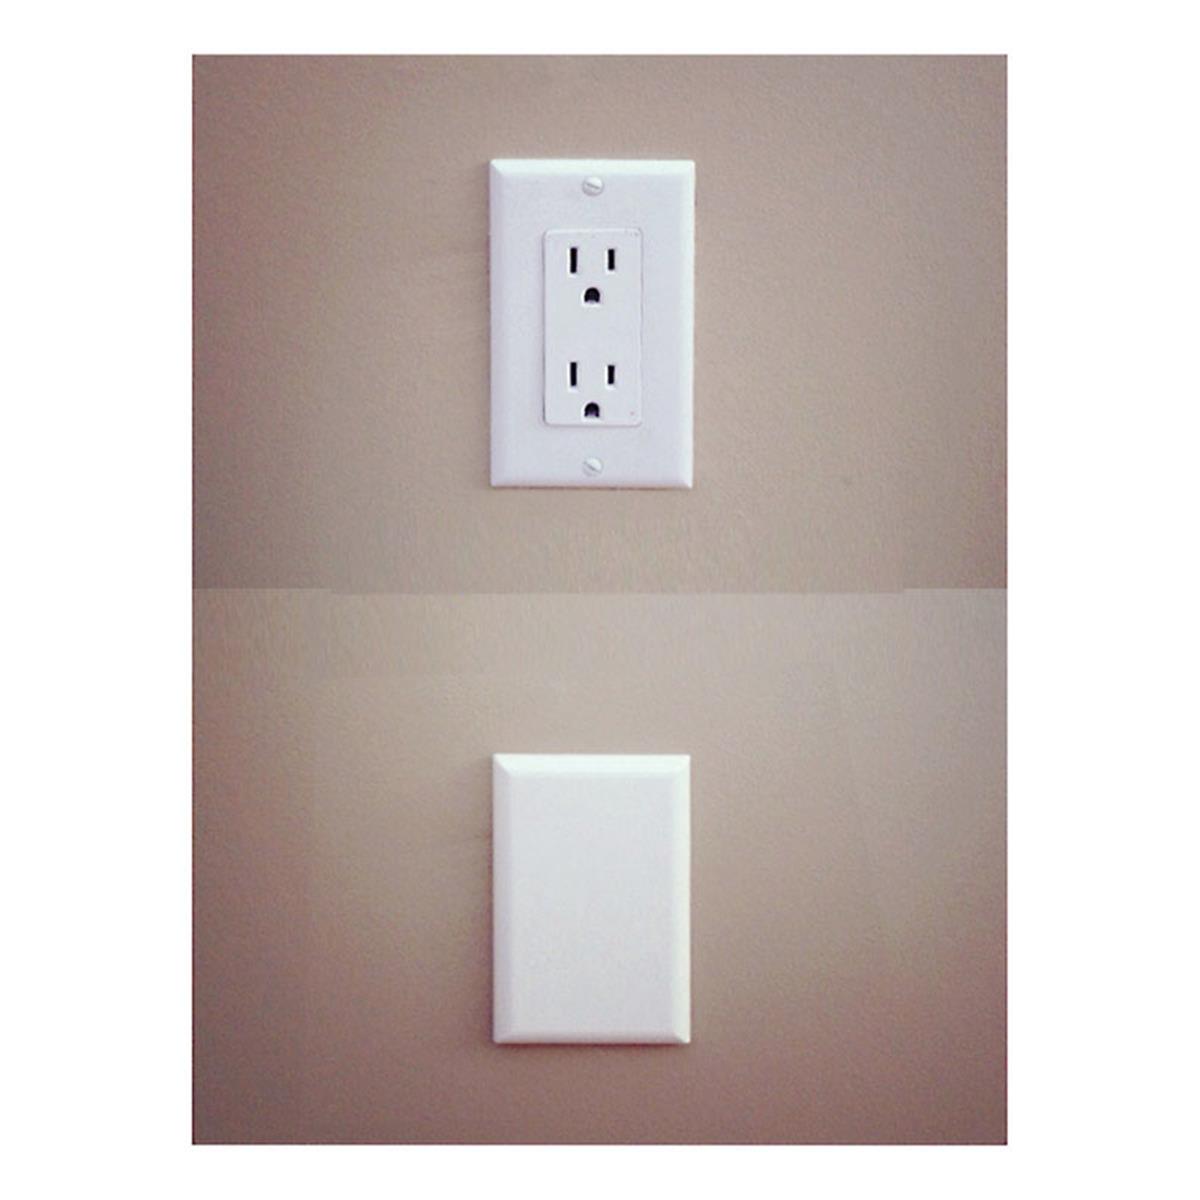 5988704 Coverplug White Plastic Outlet Cover - Pack Of 2